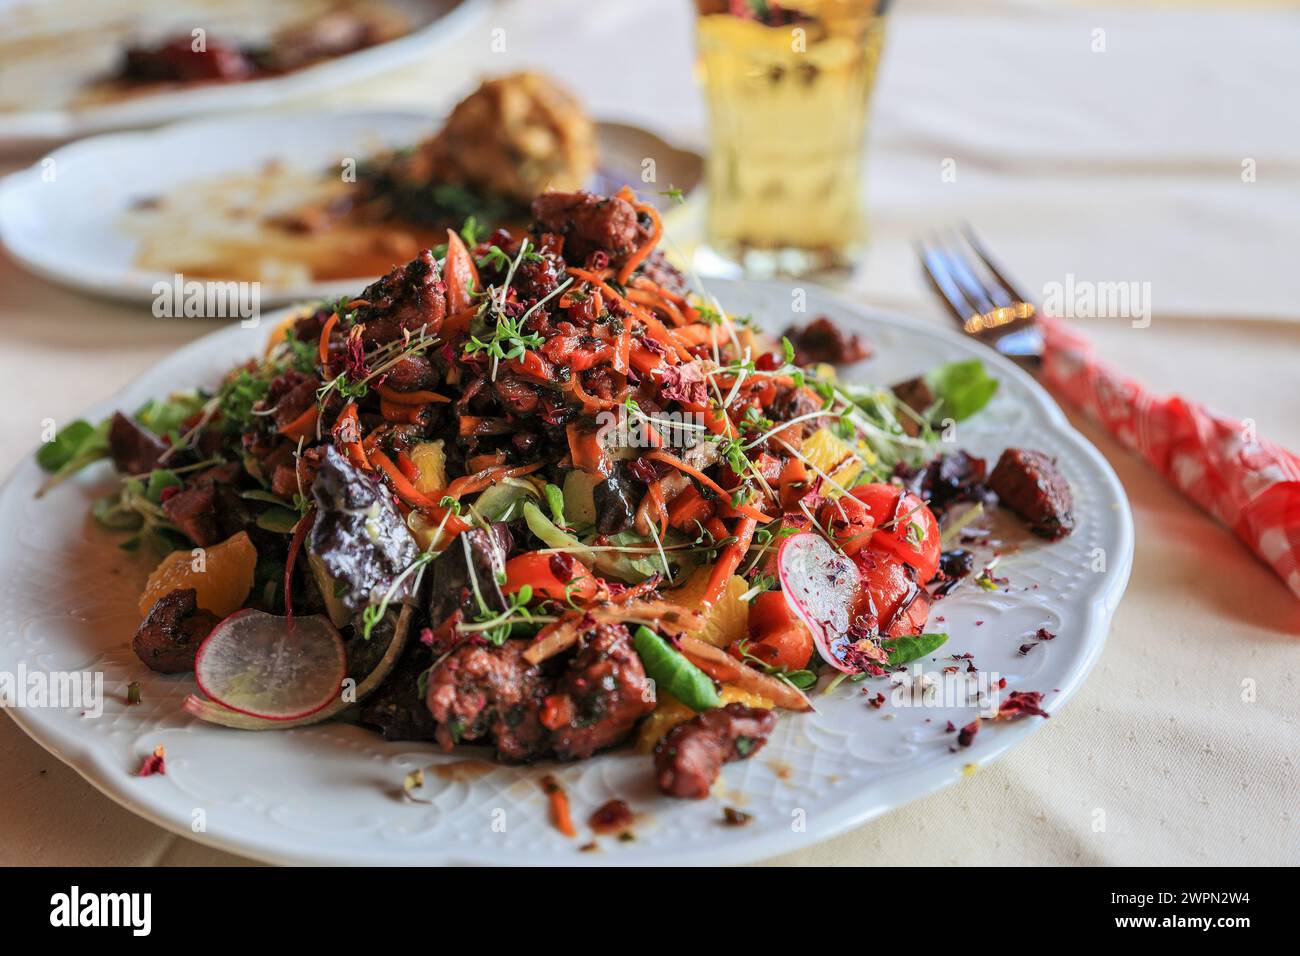 Austrian salad speciality in autumnal game season - colorful fresh salad with grilled wild pheasant pieces Stock Photo